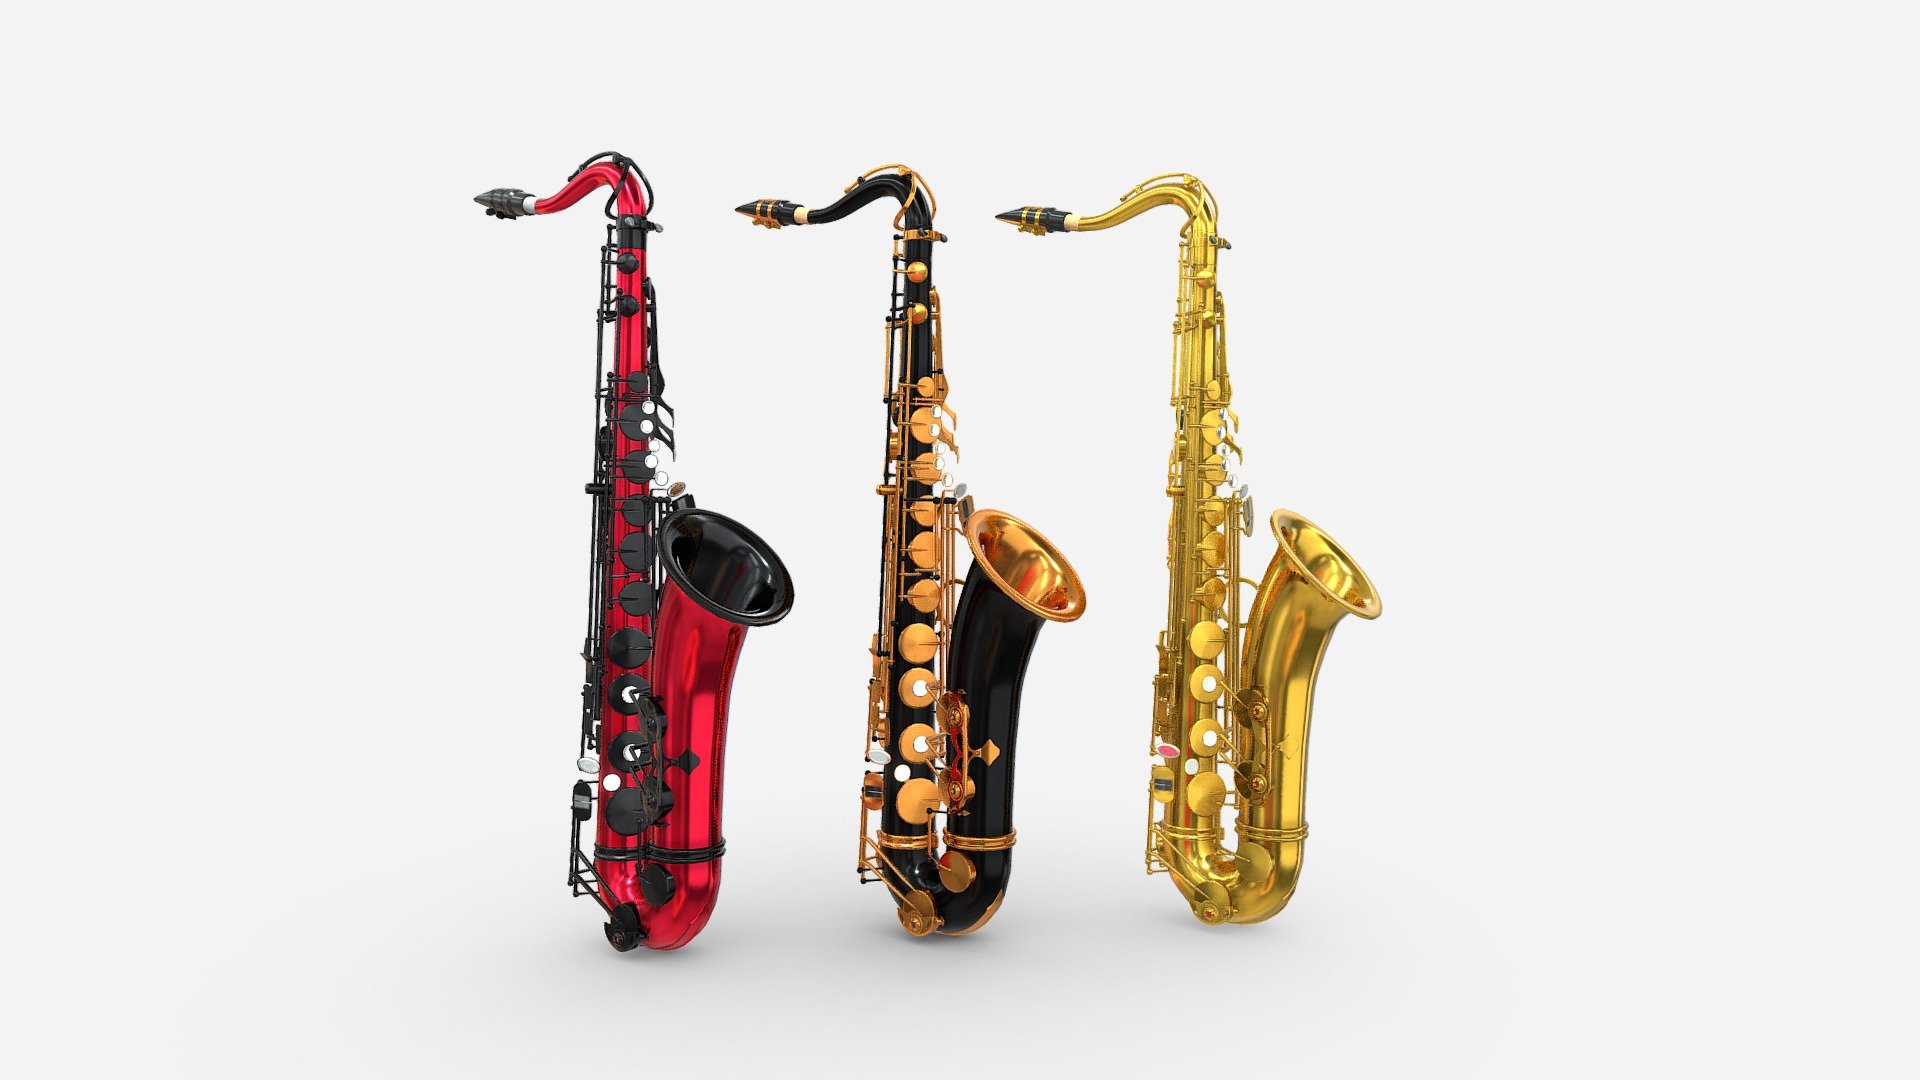 Saxophone is a reed wind instrument.

Classical saxophone in three color variations. This musical instrument can be suitable for any music game that can use this asset.

MODEL

• Polys: 19150

• Verts: 19048

TEXTURES

• Albedo

• Normal

• Metallic

• Roughness

• AmbientOcclusion

(PBR workflow)

4096x4096 high resolution texture sets are made according to the working process PBR 3d model